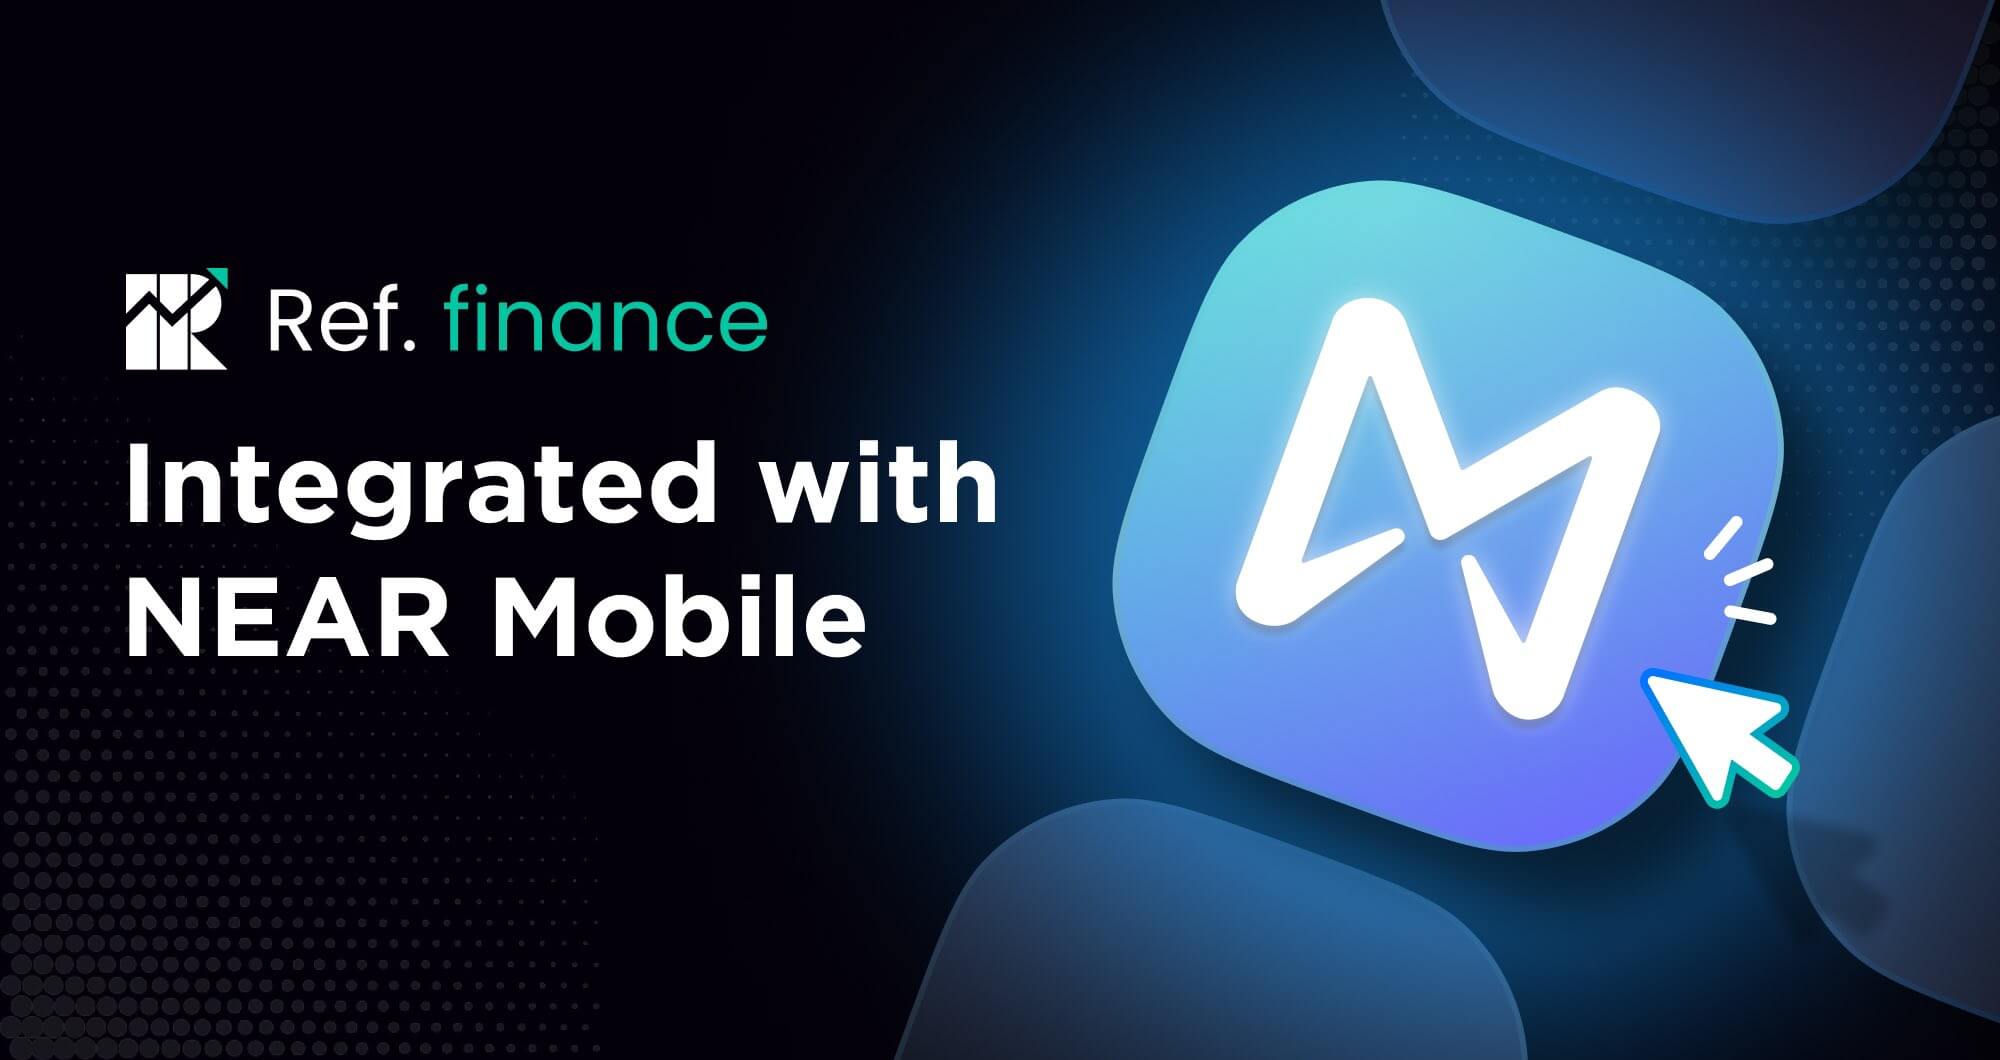 Ref finance integrates with NEAR Mobile